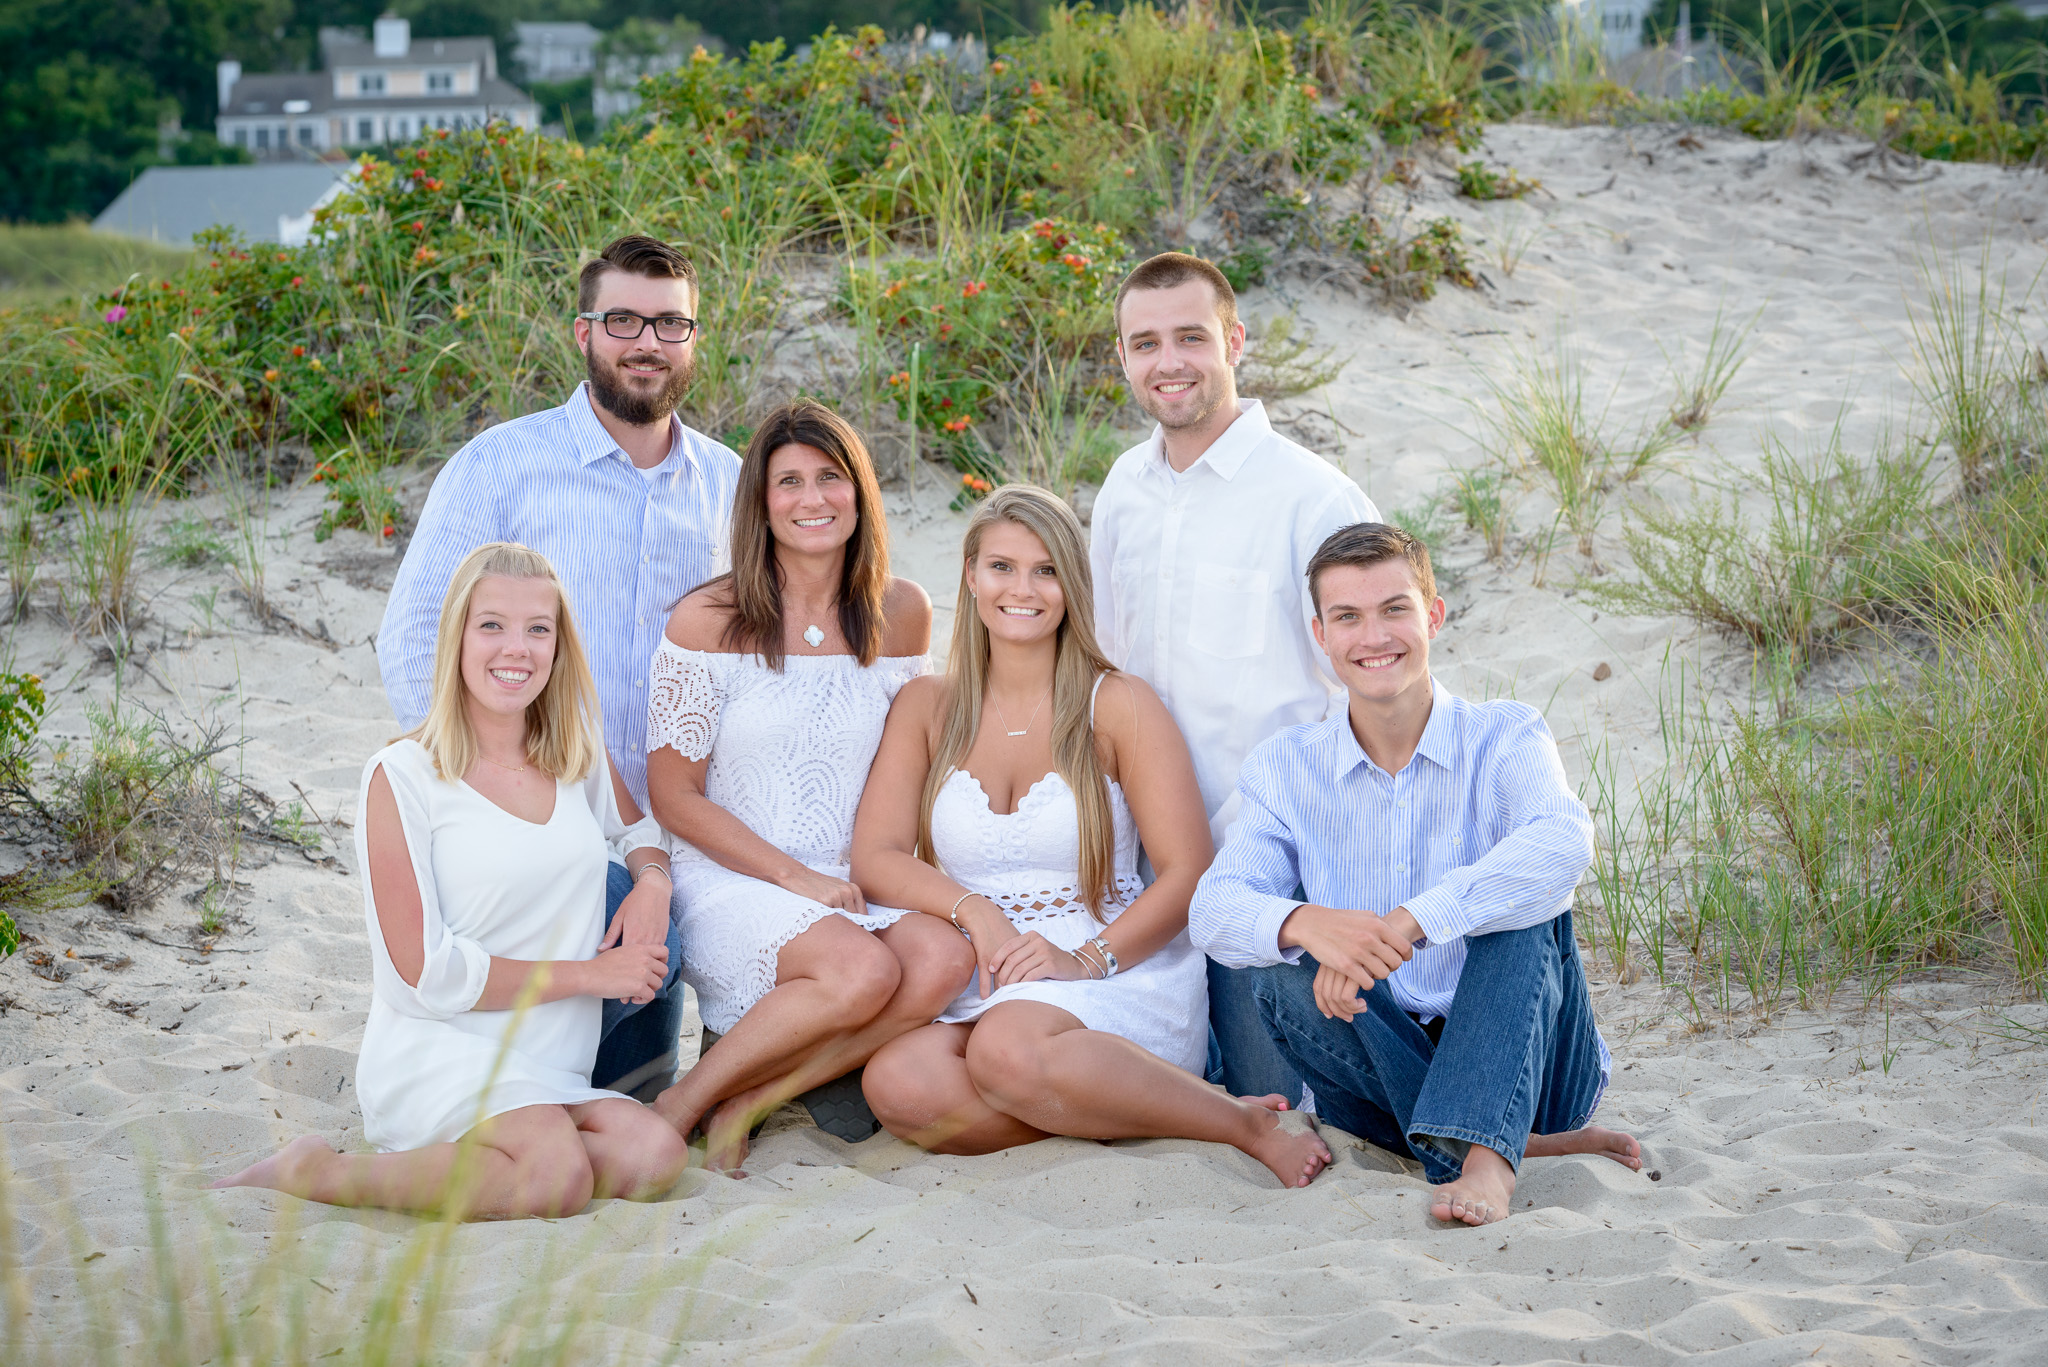 Cape Cod Family Portrait on the Beach while on your summer vacation